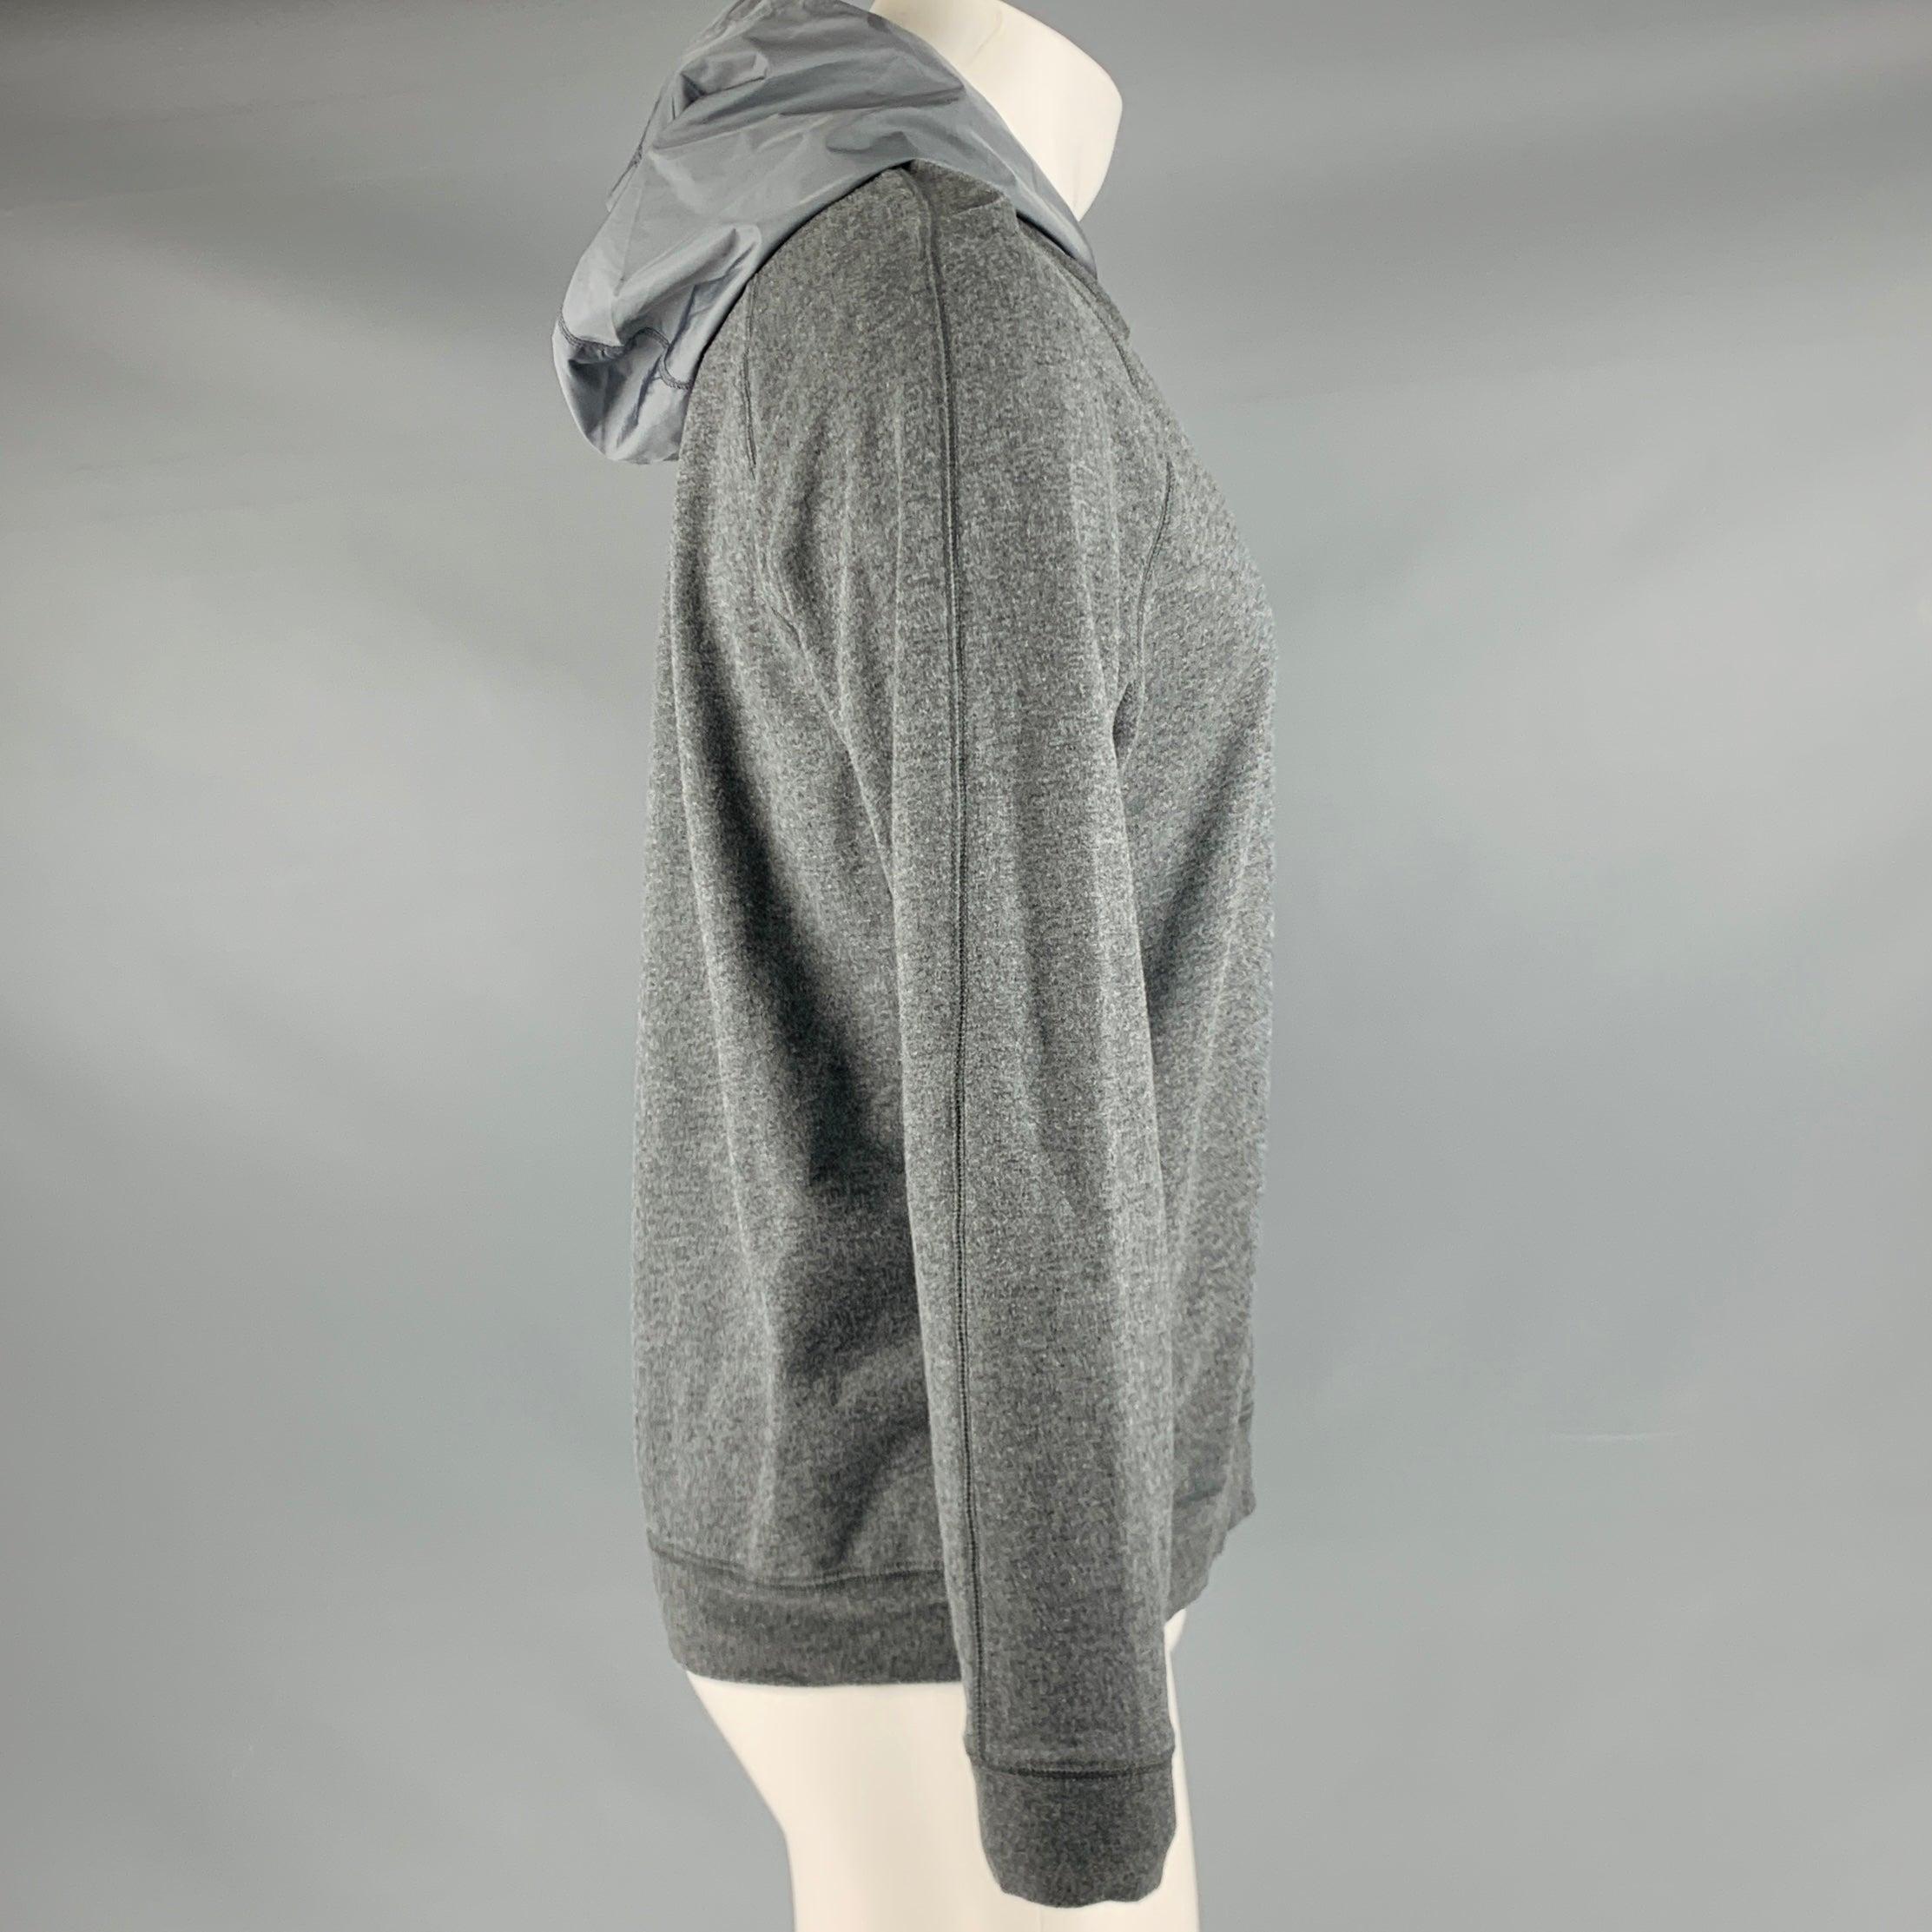 VINCE sweatshirt
in a heather grey cotton blend fabric featuring a faux layer with hood style.Very Good Pre-Owned Condition. Minor signs of wear. 

Marked:   M 

Measurements: 
 
Shoulder: 17.5 inches Chest: 40 inches Sleeve: 24.5 inches Length: 25